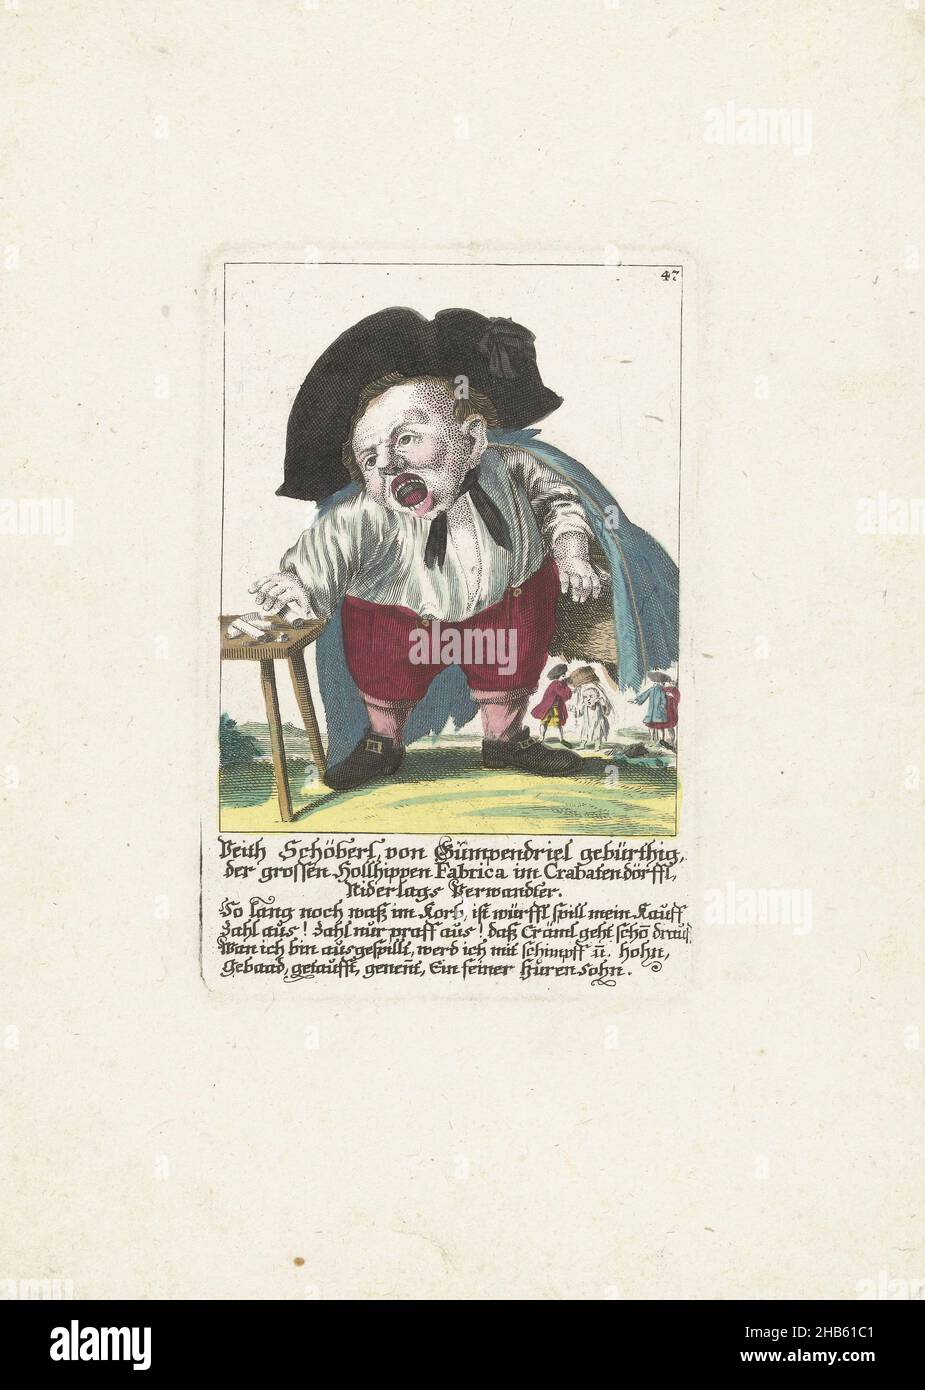 The dwarf Veith Schöberl von Gümpendriel, c. 1710, Veith Schöberl von Gümpendriel gebürthig, der grossen Hollhippen Fabrica im Crabatendörffl, Niderlags Verwandter (title on object), Il Callotto resurcitato oder Neu eingerichtes Zwerchen Cabinet (series title), The dwarf Veith Schöberl von Gümpendriel. In the caption below the title a four-line verse in German. Numbered top right: 47. Part of a loose-leaf edition from c. 1710 of a series of caricatures featuring dwarfs, known as The Dwarf Stage., print maker: Martin Engelbrecht (attributed to), Augsburg, 1705 - 1715, paper, engraving, height Stock Photo